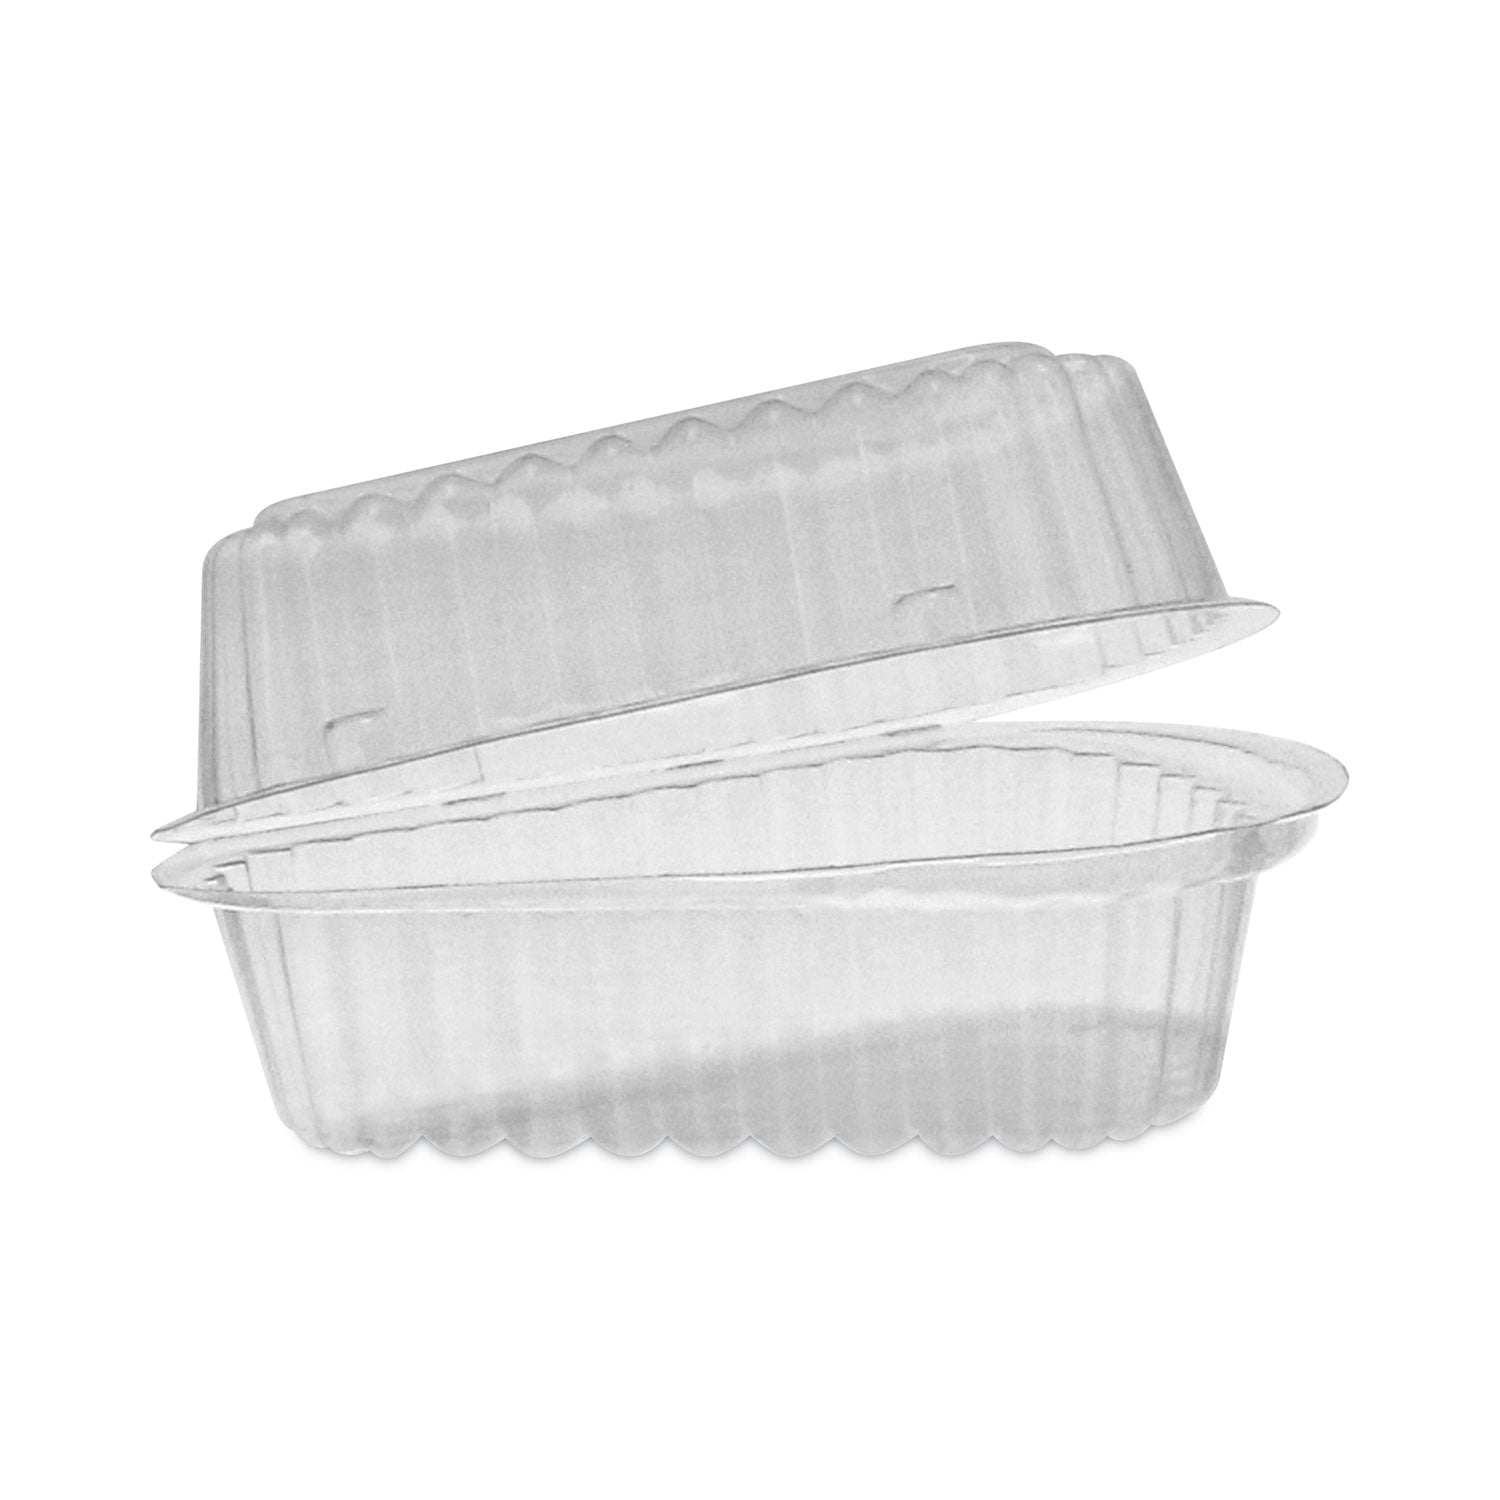 hinged-lid-pie-wedge-container-6-pie-wedge-45-x-45-x-25-clear-plastic-510-carton_pctyci890060000 - 1